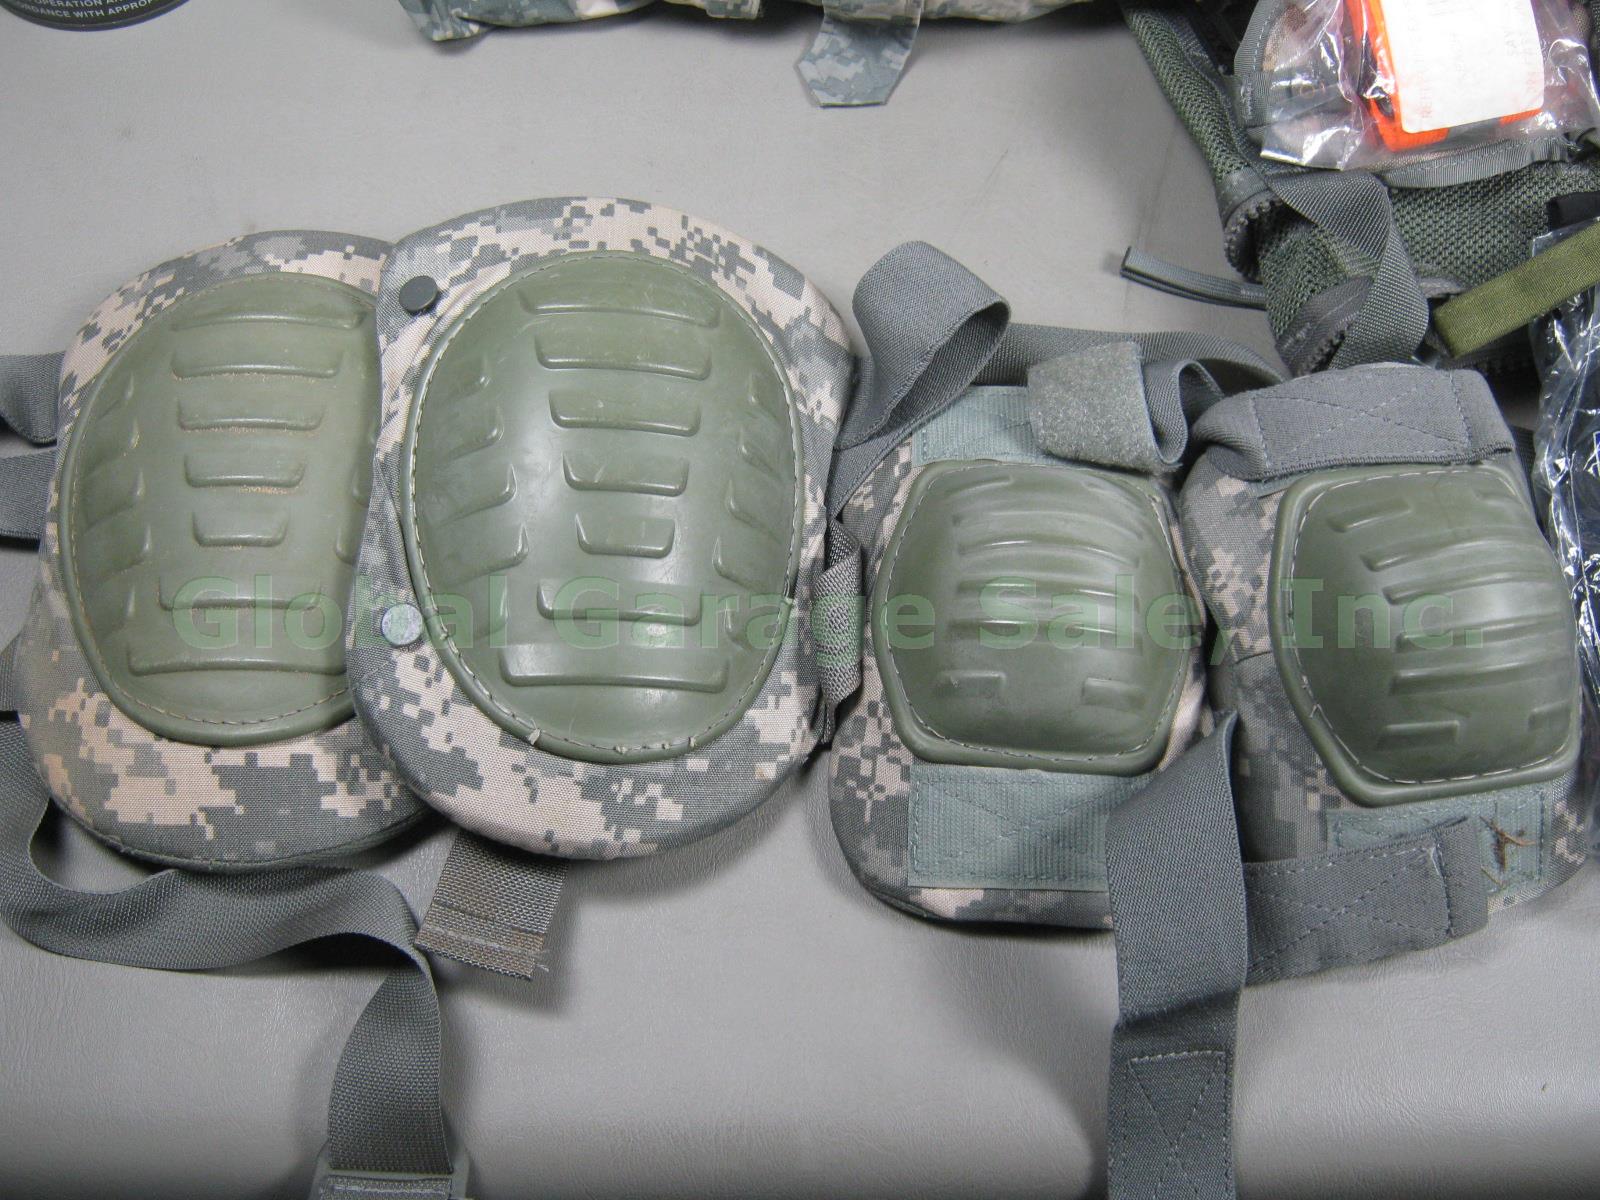 NEW Huge Military Gear Lot Rain Jacket Gloves Knee Pads Molle Load Vest Canteen 2